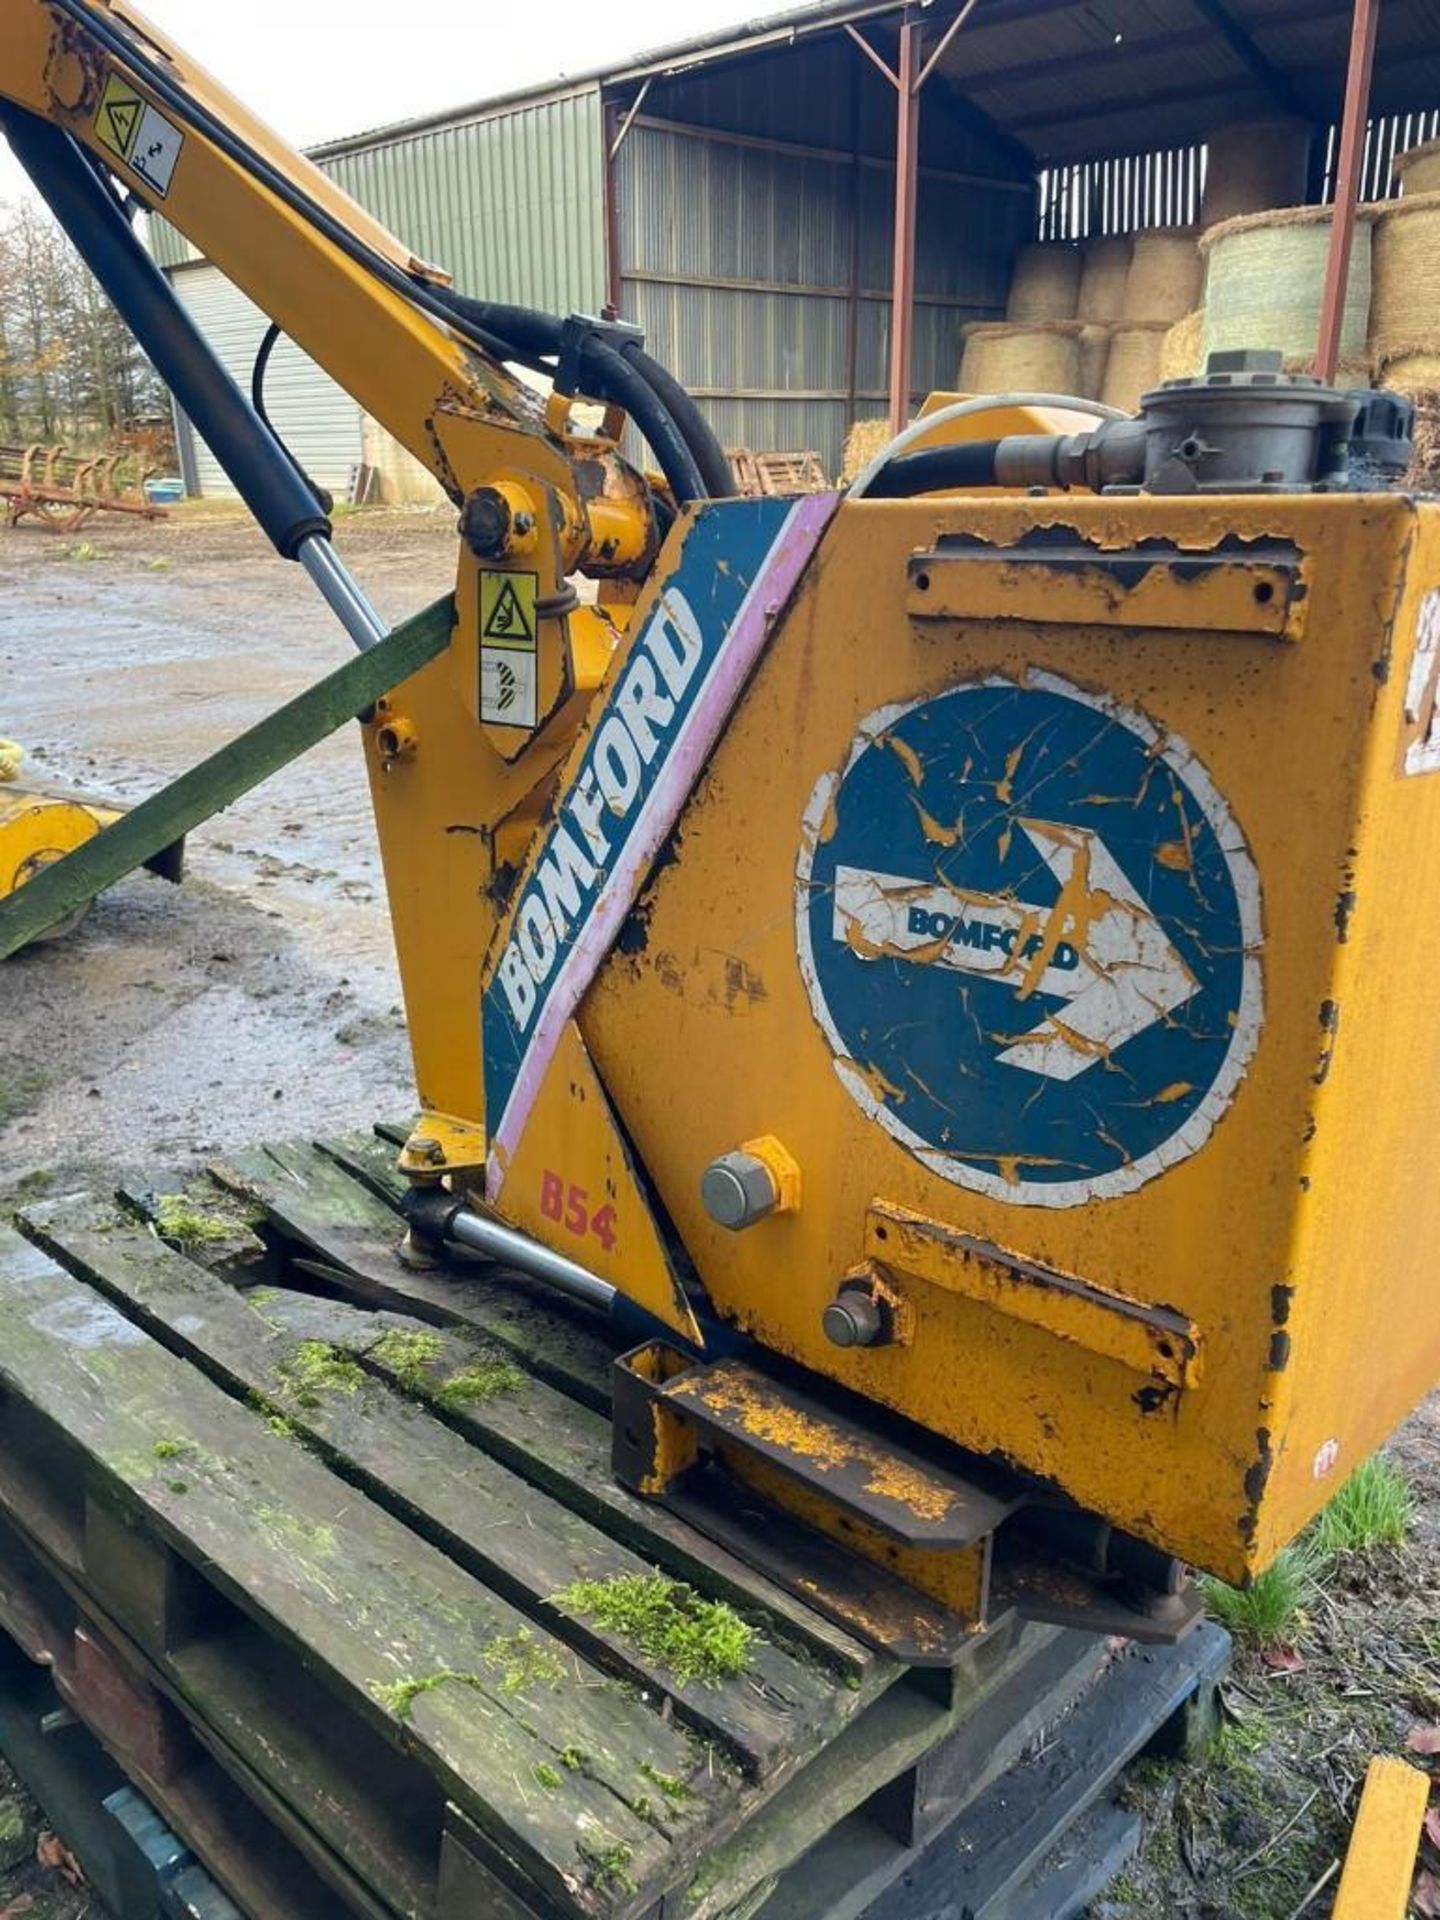 2006 Bomford B54 mounted hedgecutter